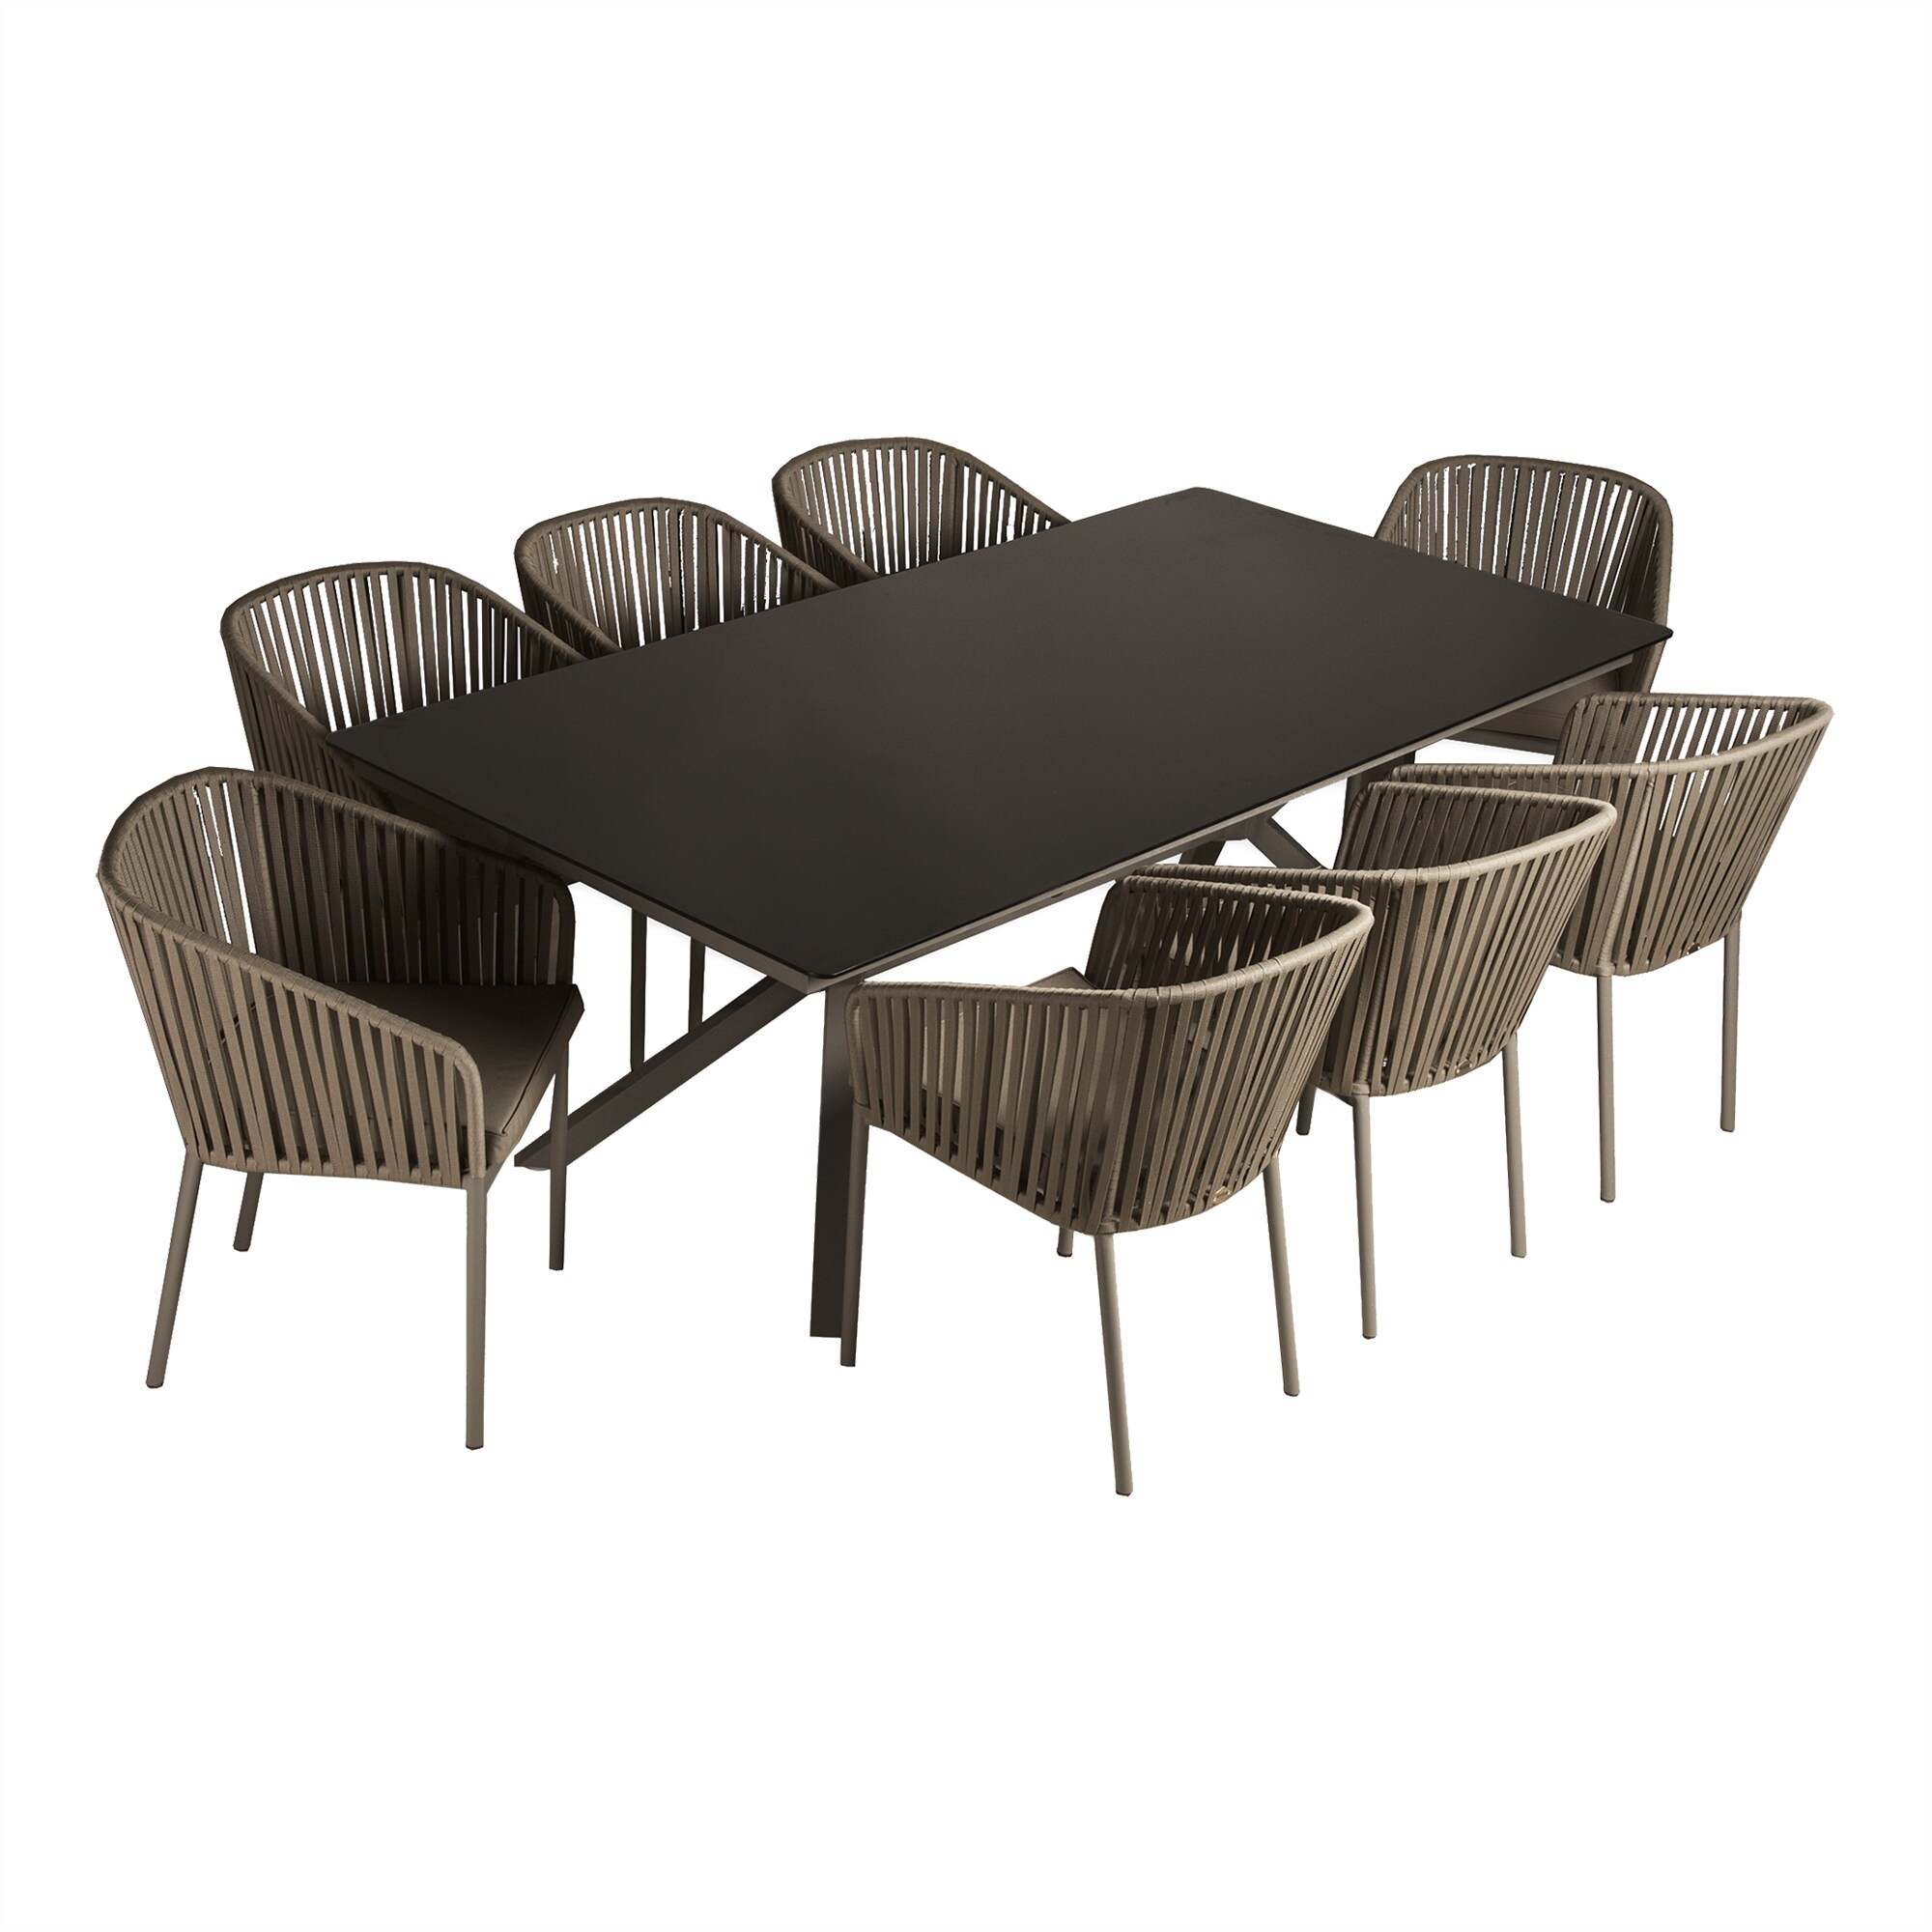 Ambar Corcega Dining Table with 8 Chairs, Taupe, 220 x 100cm